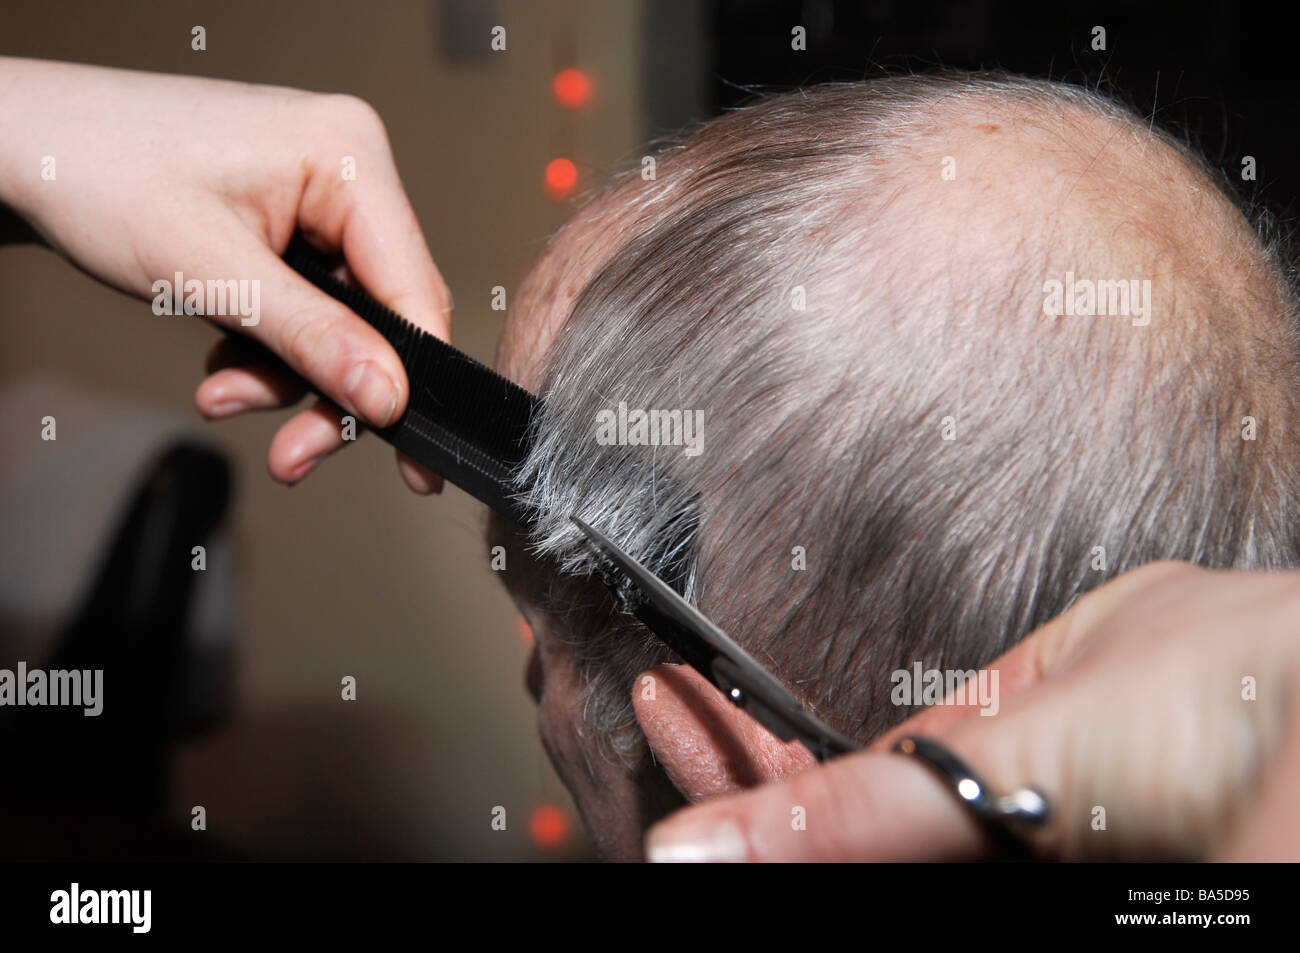 how to cut older mens hair with scissors